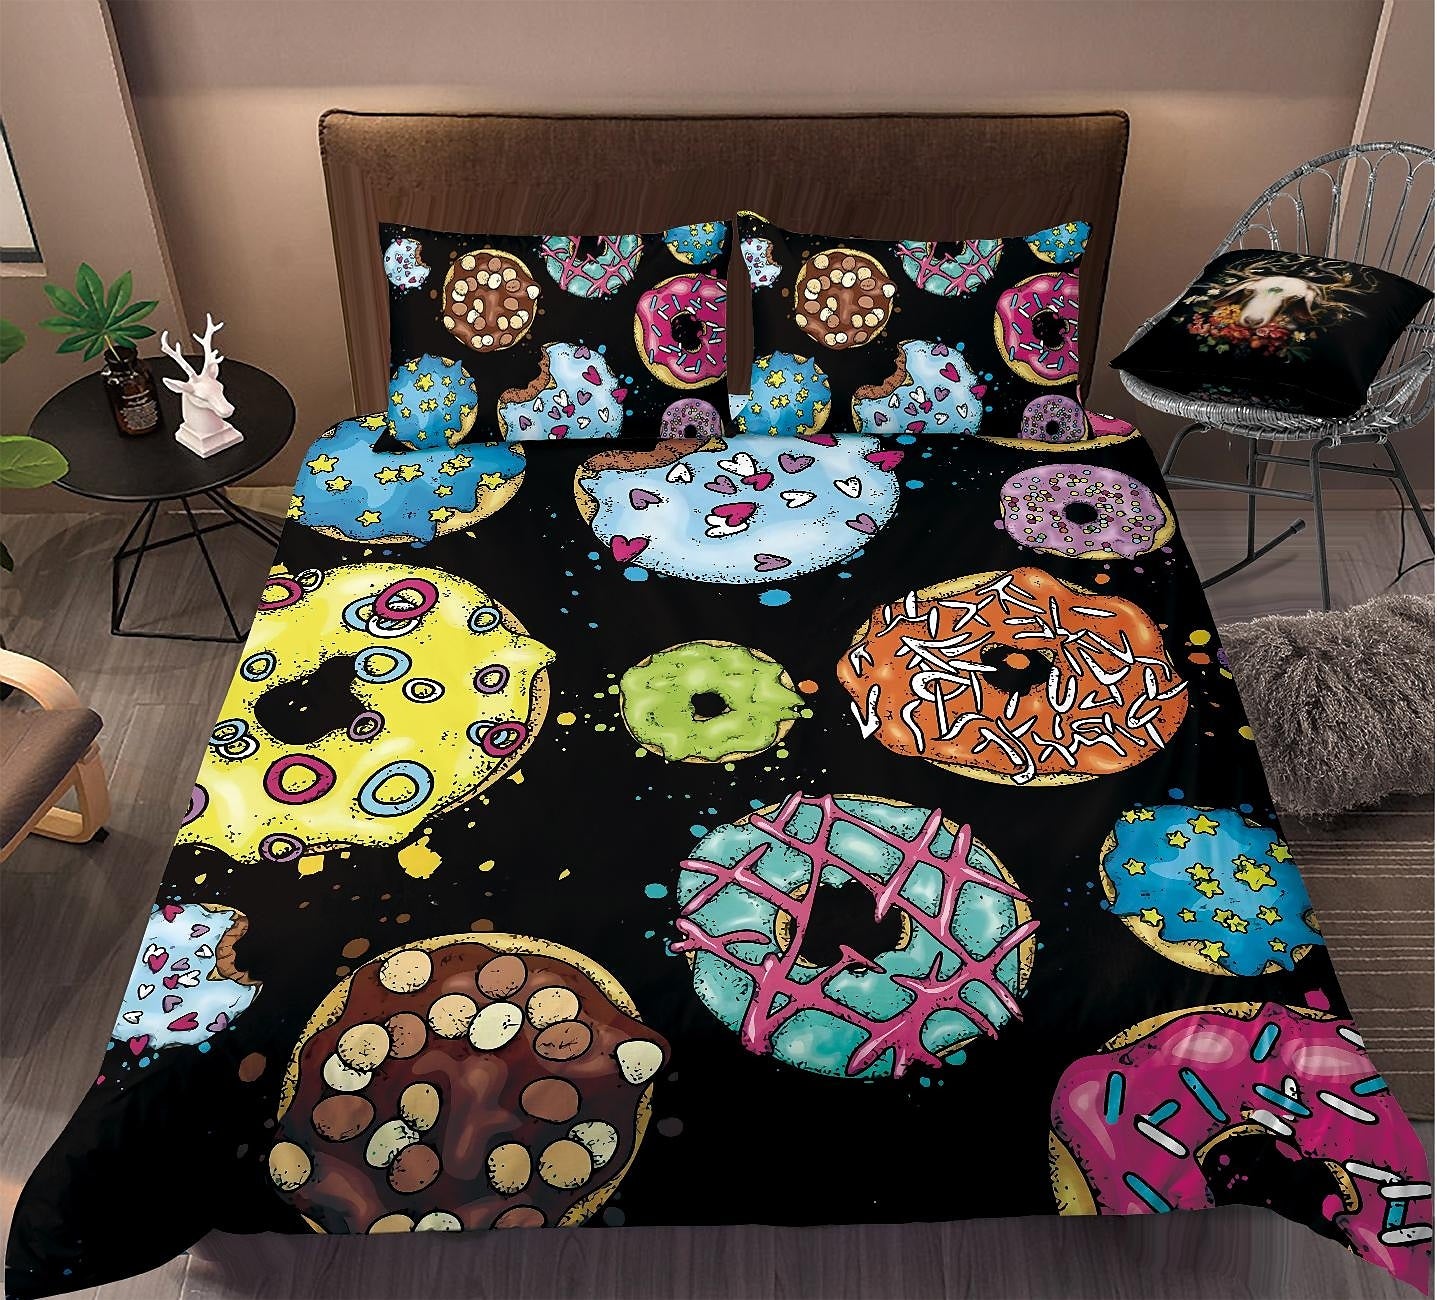 Colorful Donut Bedding Set Duvet Cover And 2 Pillowcases